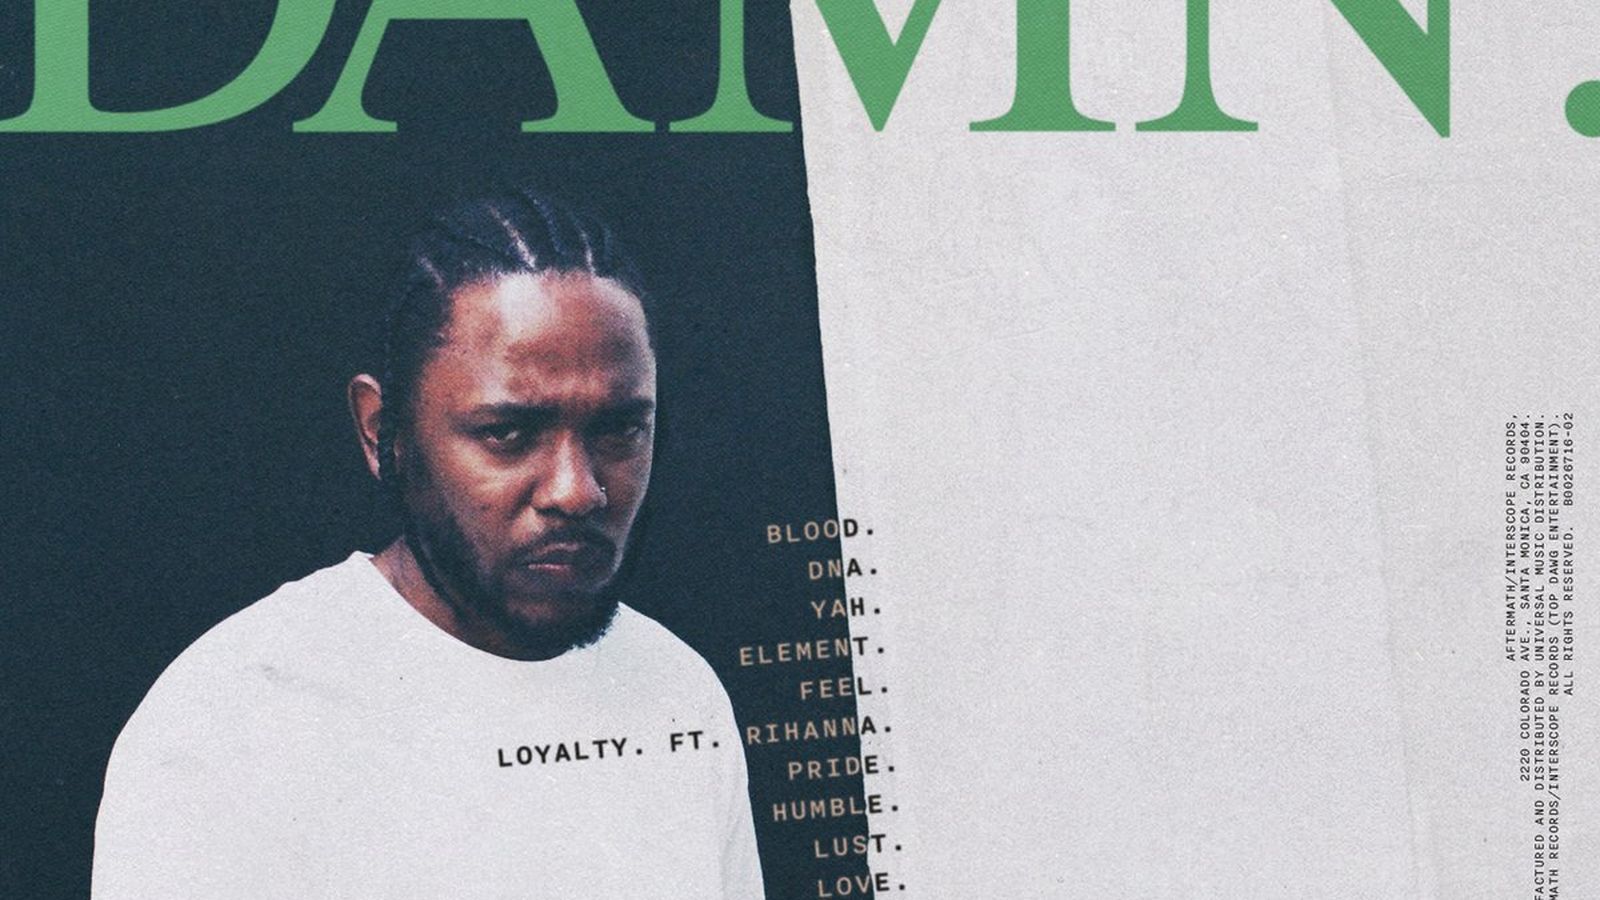 Kendrick Lamar is releasing another album on Sunday, according to